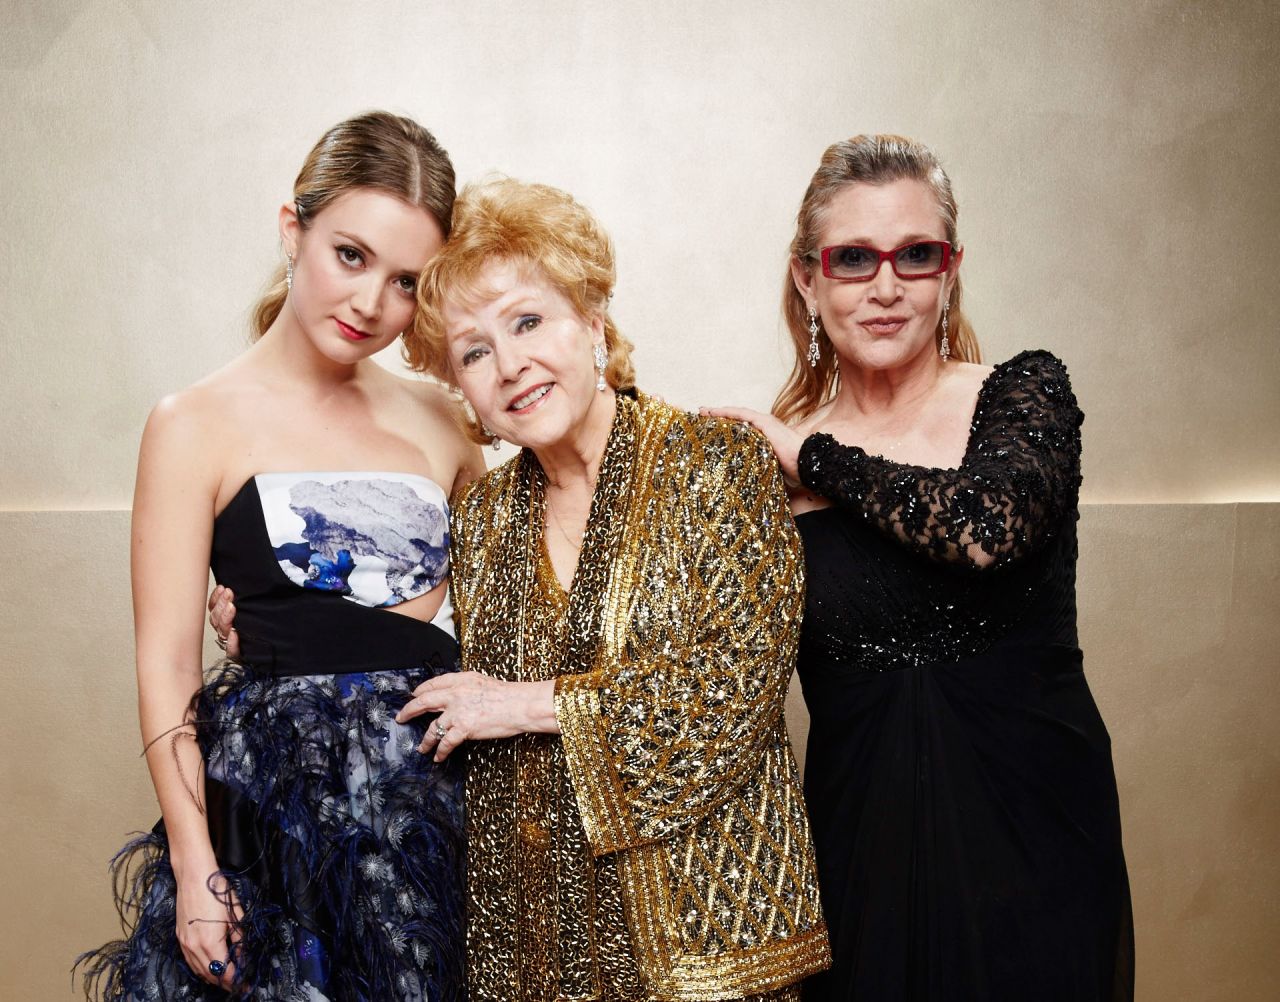 From left, Billie Lourd, Reynolds and Fisher take a photo together at the Screen Actors Guild Awards in January 2015. Lourd became an actress like her mother and grandmother.